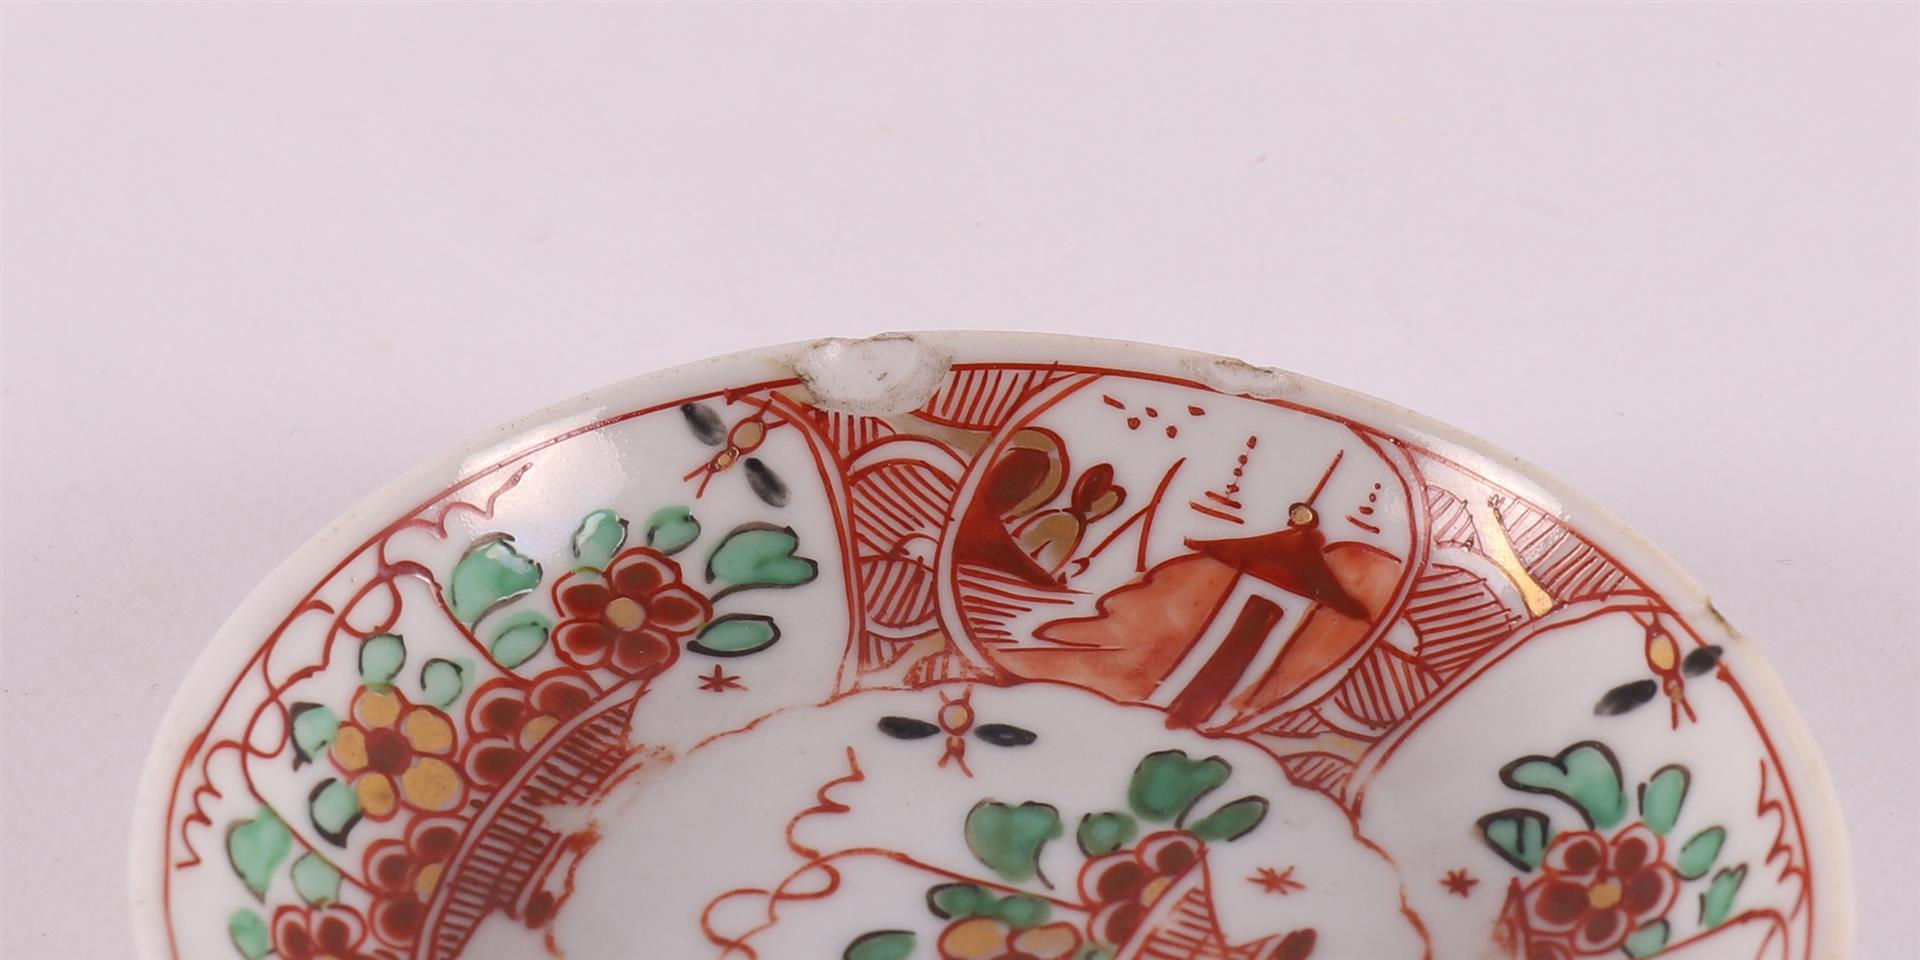 An Amsterdam colorful porcelain bowl, China, Qianglong, 18th century. Polychrome decoration of - Image 15 of 20